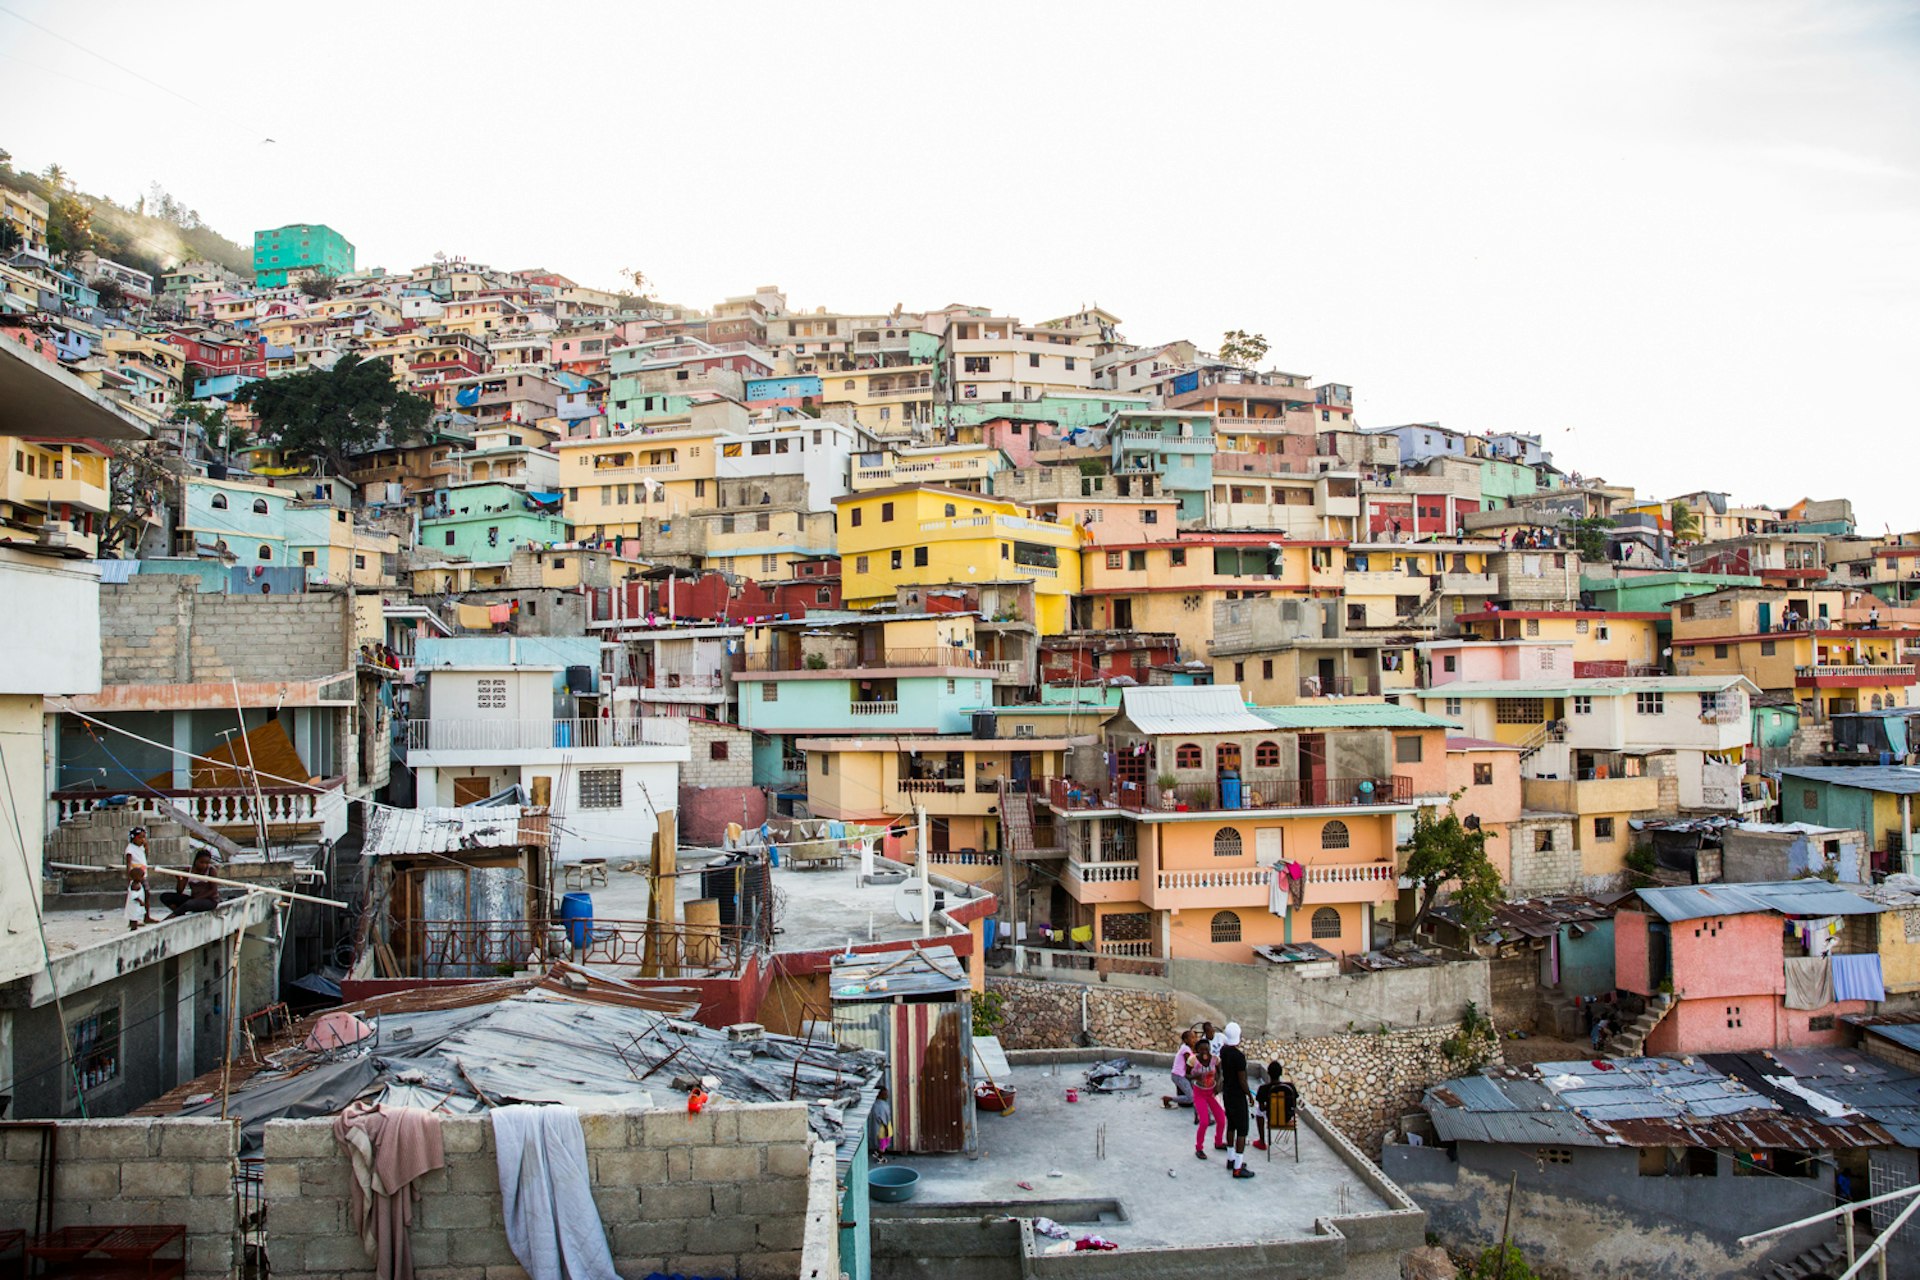 Jalouzi City, the largest slum in Port-au- Prince. In 2015, the houses were painted in color to uplift the community and bring hope. This mission was started by aresident and painter of Jalouzi, Duval Pierre.